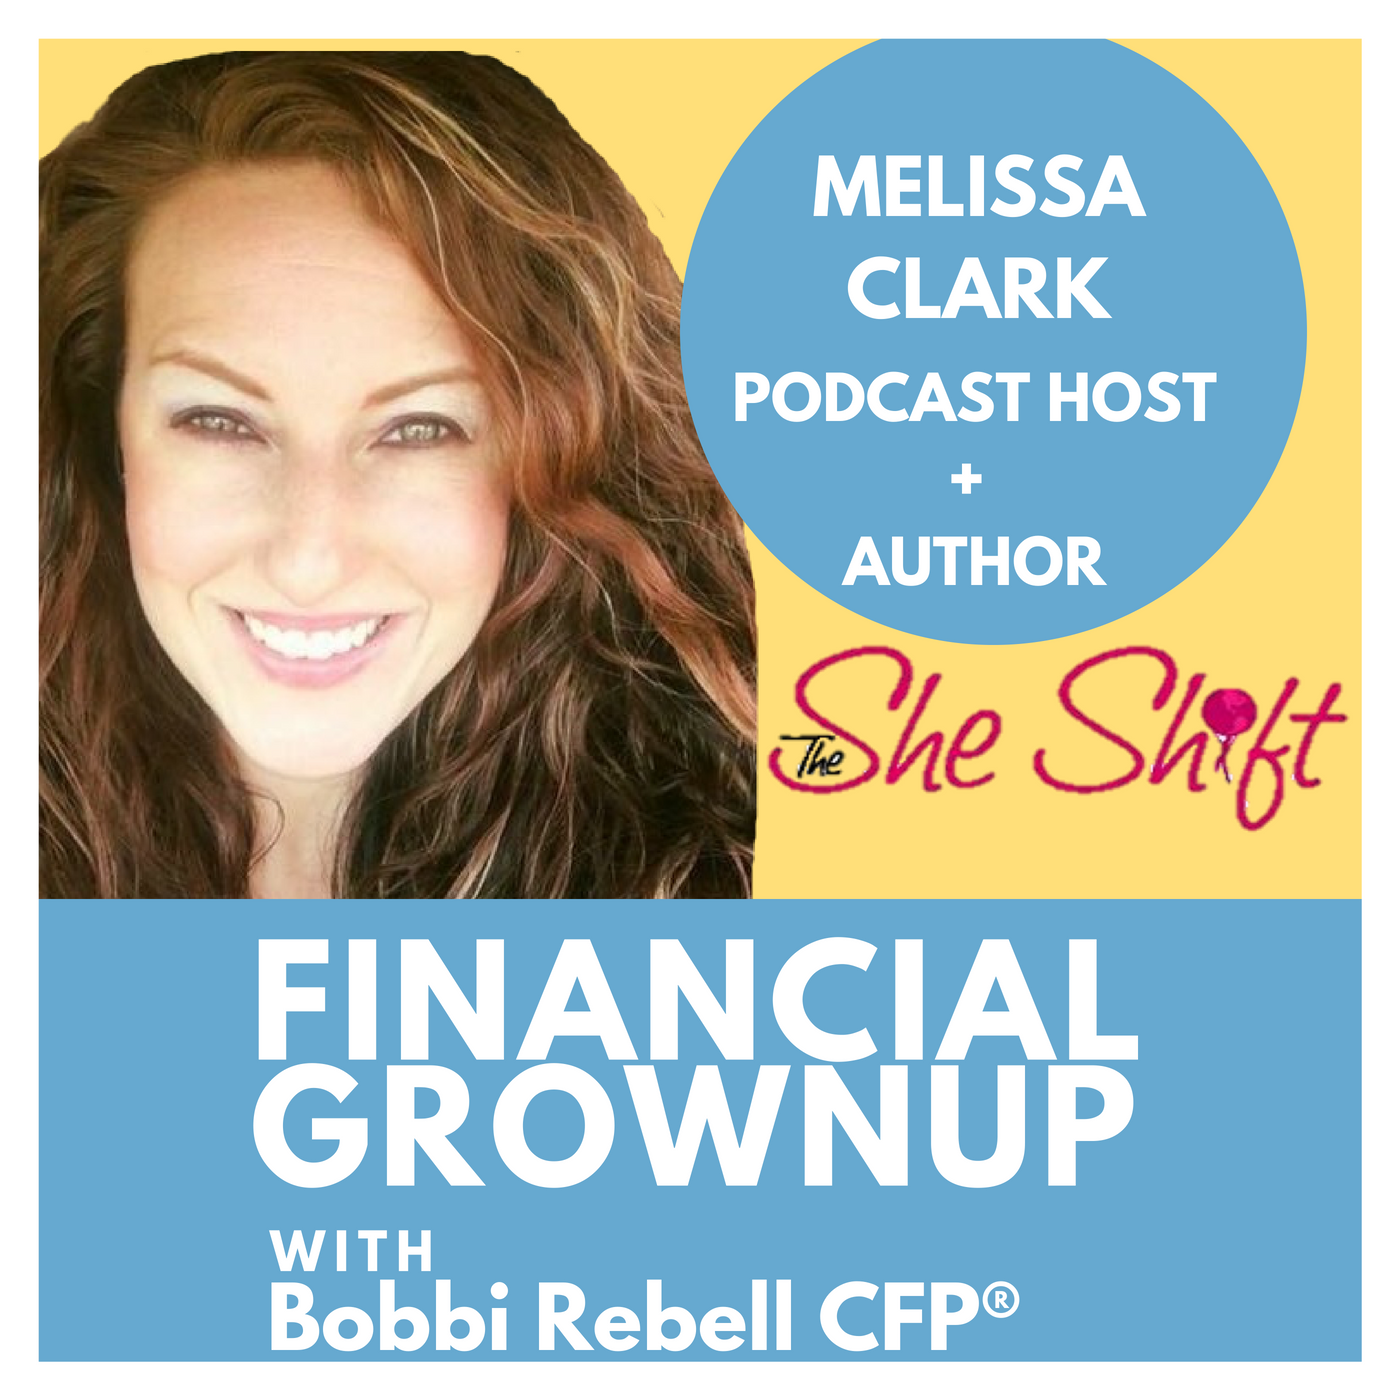 Re-branding your business for focused growth with The She Shift's ...